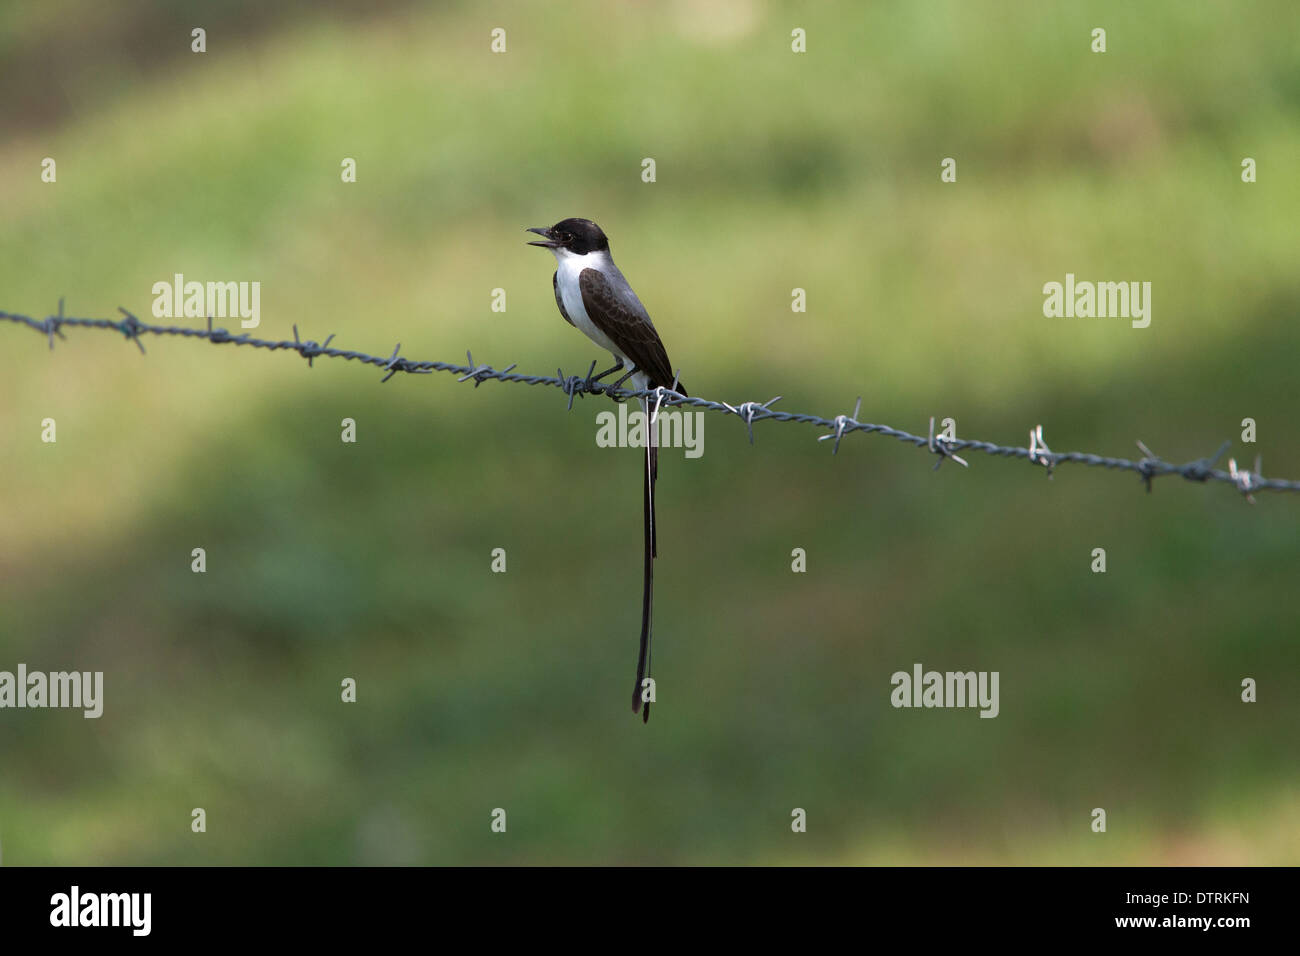 Fork-tailed Flycatcher (Tyrannus savana), perched on a barbed wire fence, Magdalena Valley, Colombia. Stock Photo